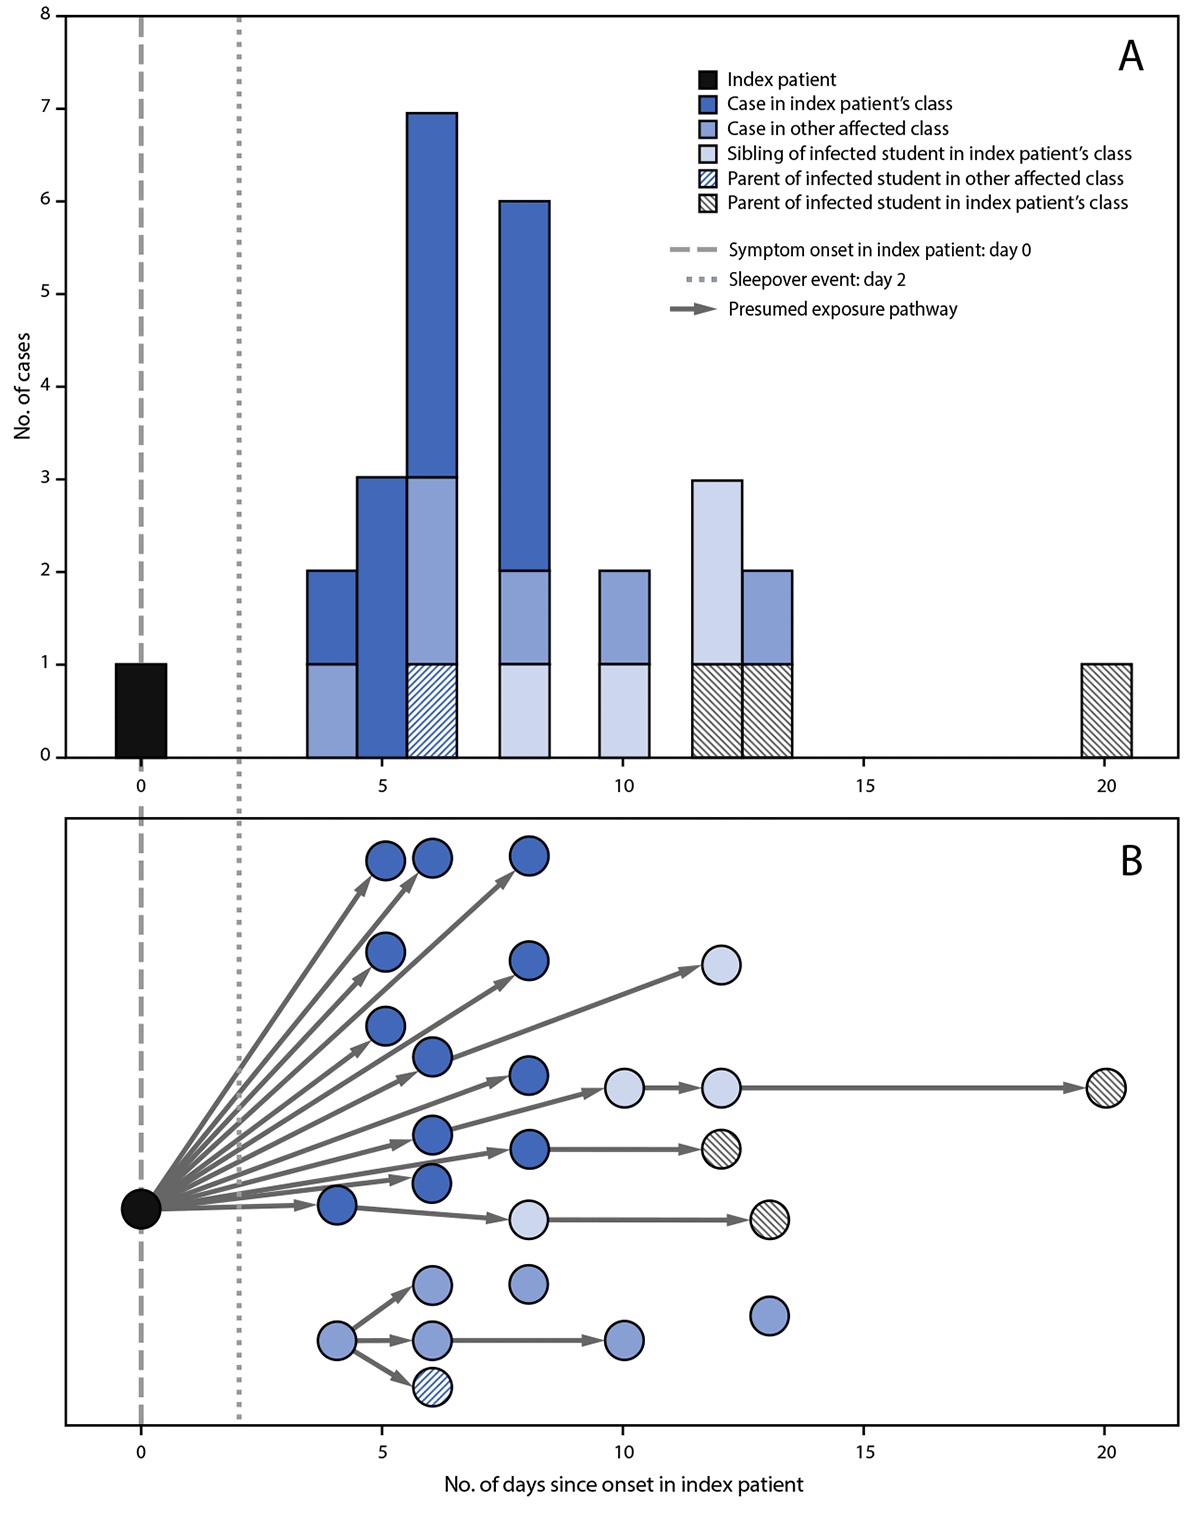 Figure consists of two graphs, a bar graph indicating timeline of illness onset and a diagram of presumed transmission pathway among students, siblings, and parents, relative to index patient illness onset, during a COVID-19 outbreak in Marin County, California, in May 2021.